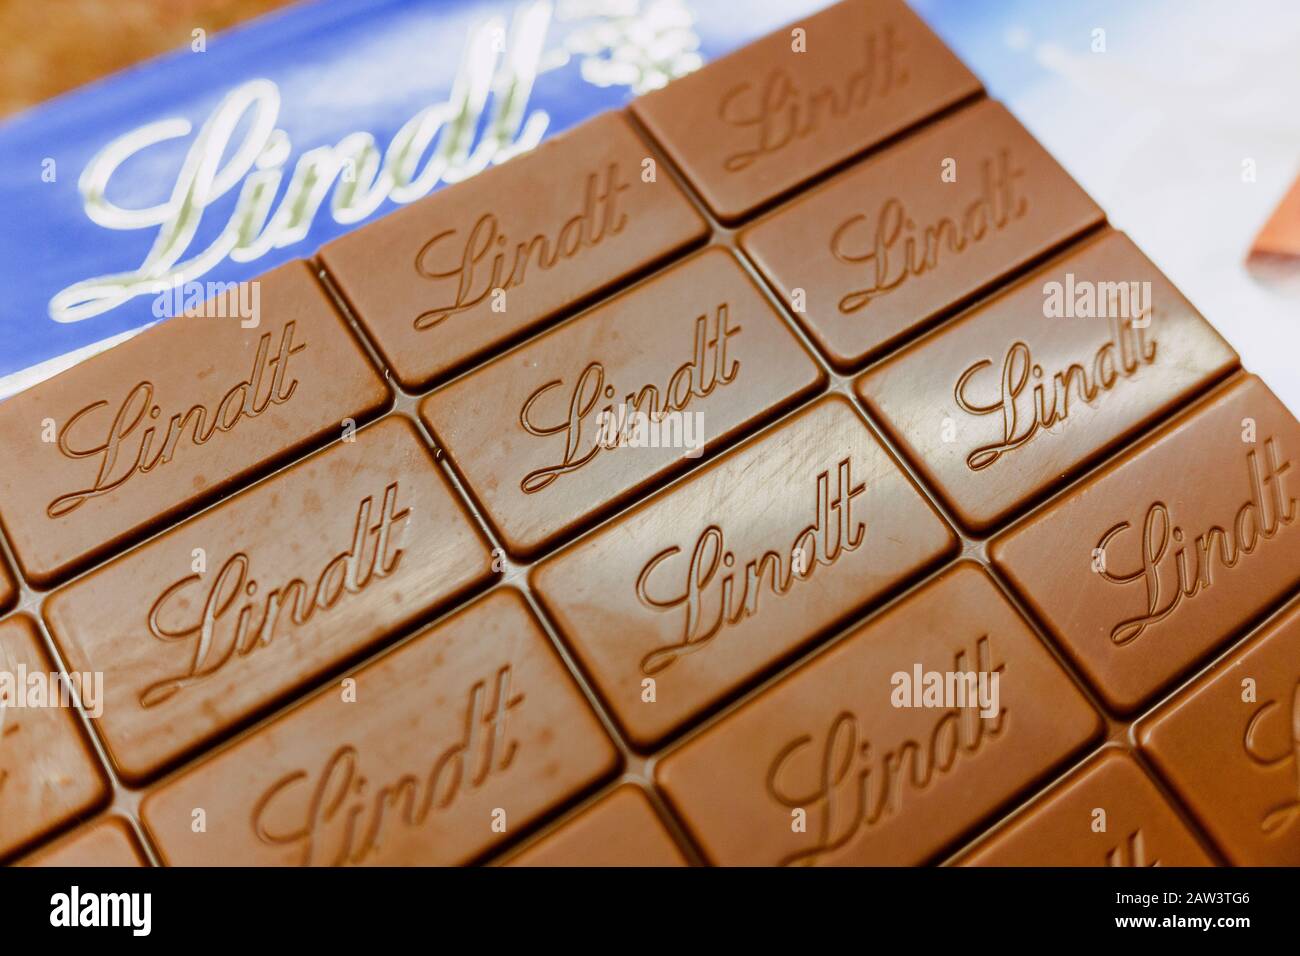 Valencia, Spain - February 5, 2020: Lindt Swiss brand chocolate tablet. Stock Photo